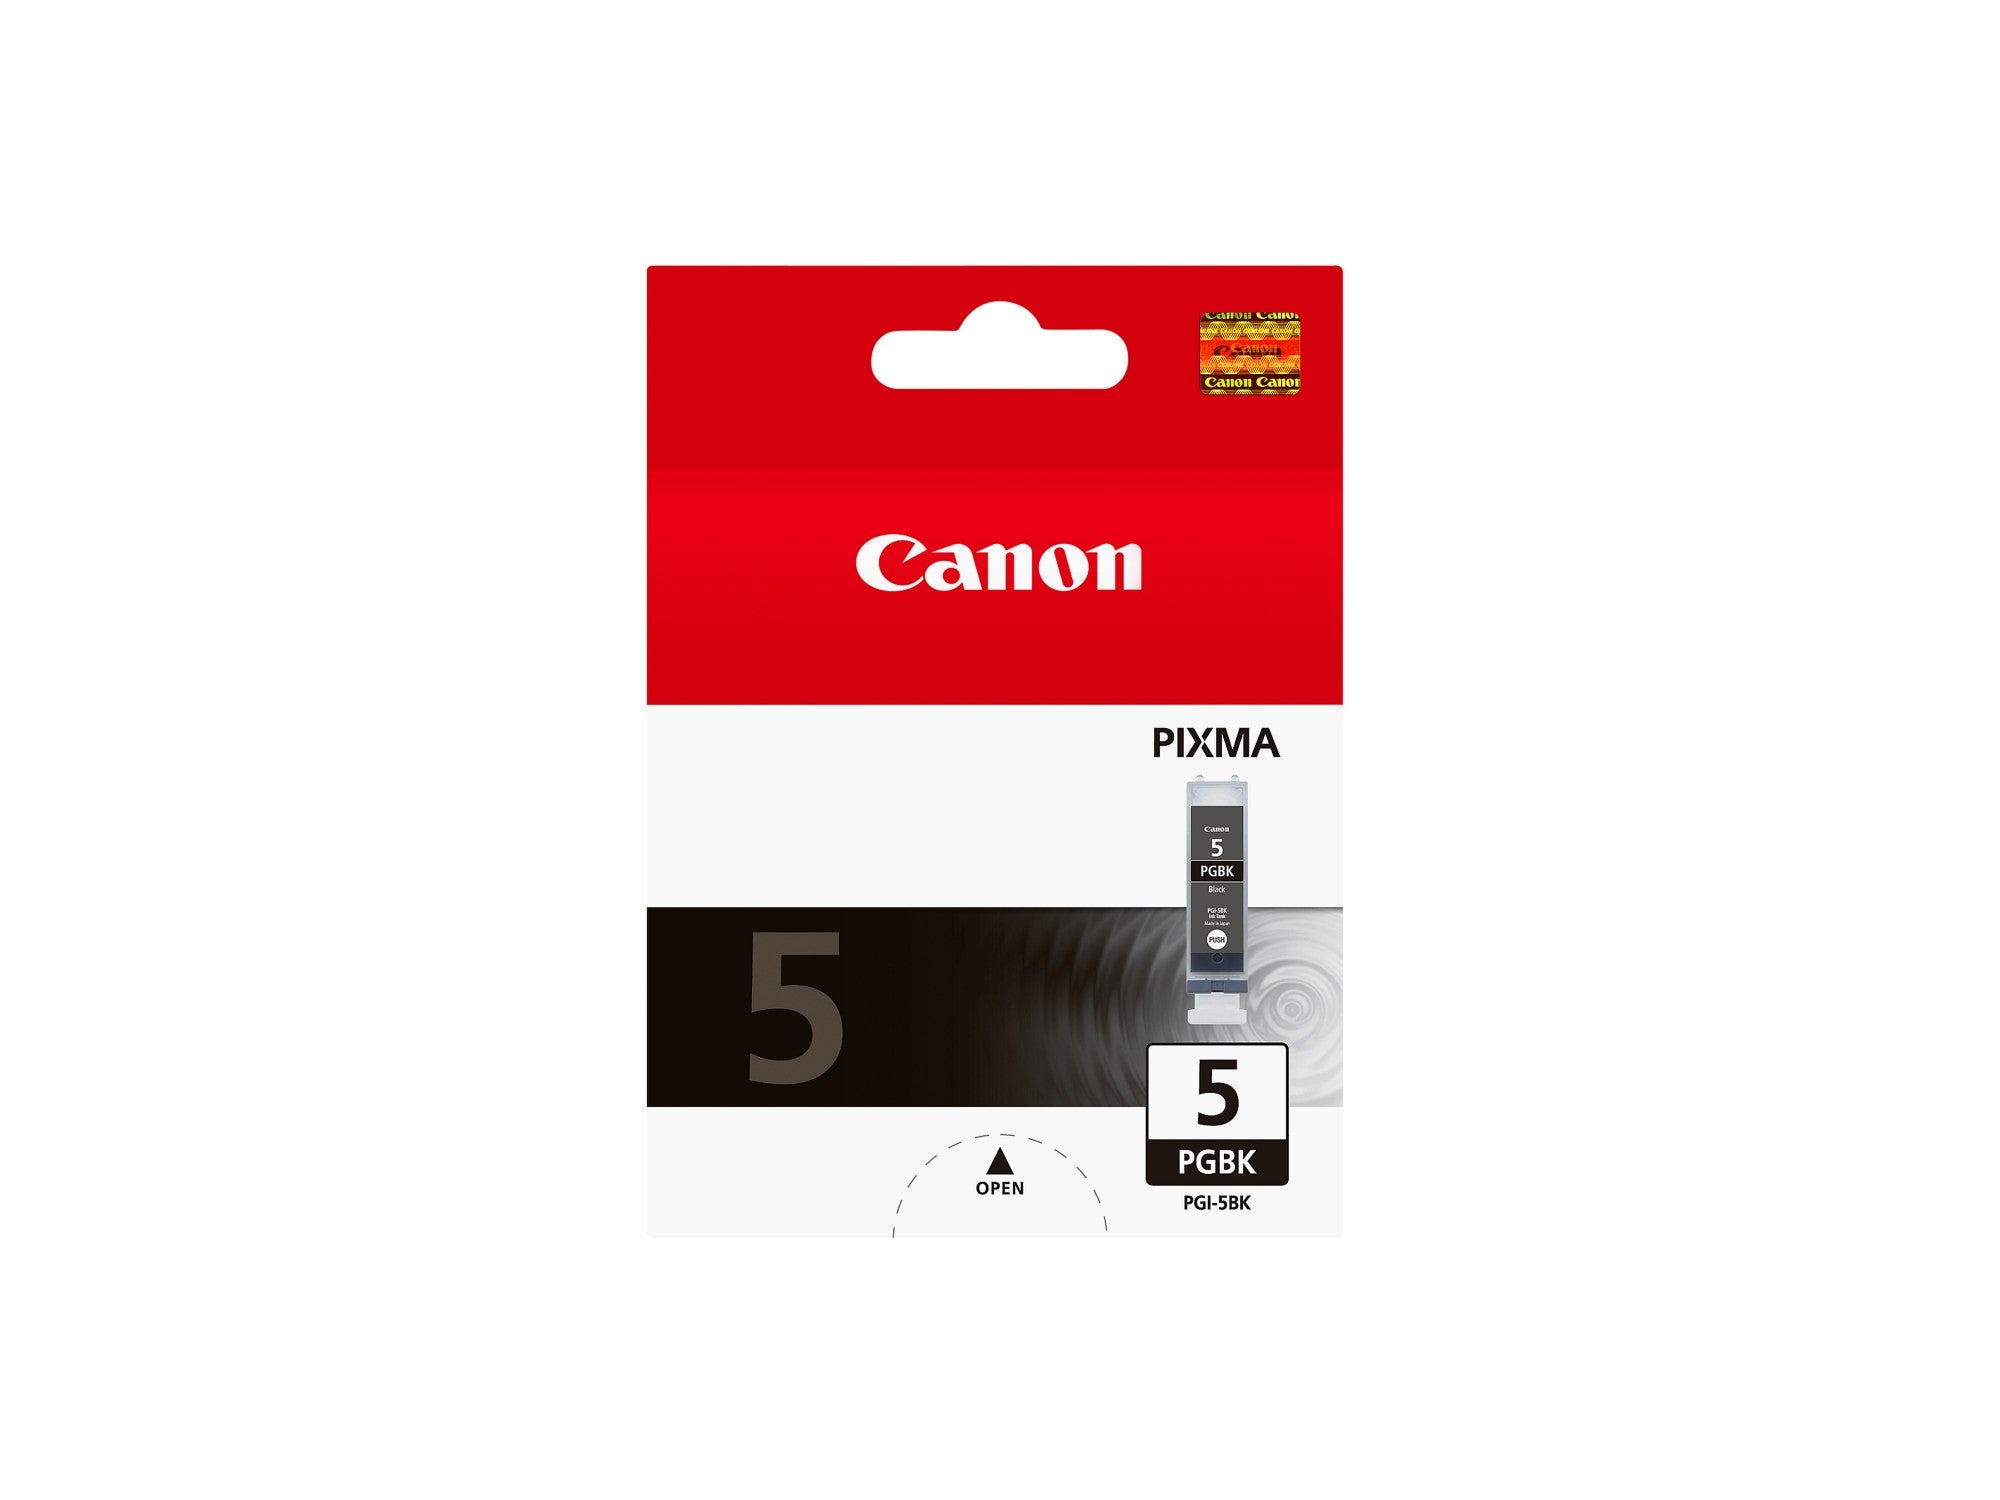 Canon 0628B001/PGI-5BK Ink cartridge black pigmented, 505 pages ISO/IEC 24711 26ml for Canon Pixma IP 3300/4200/MP 520/MP 610/MP 960